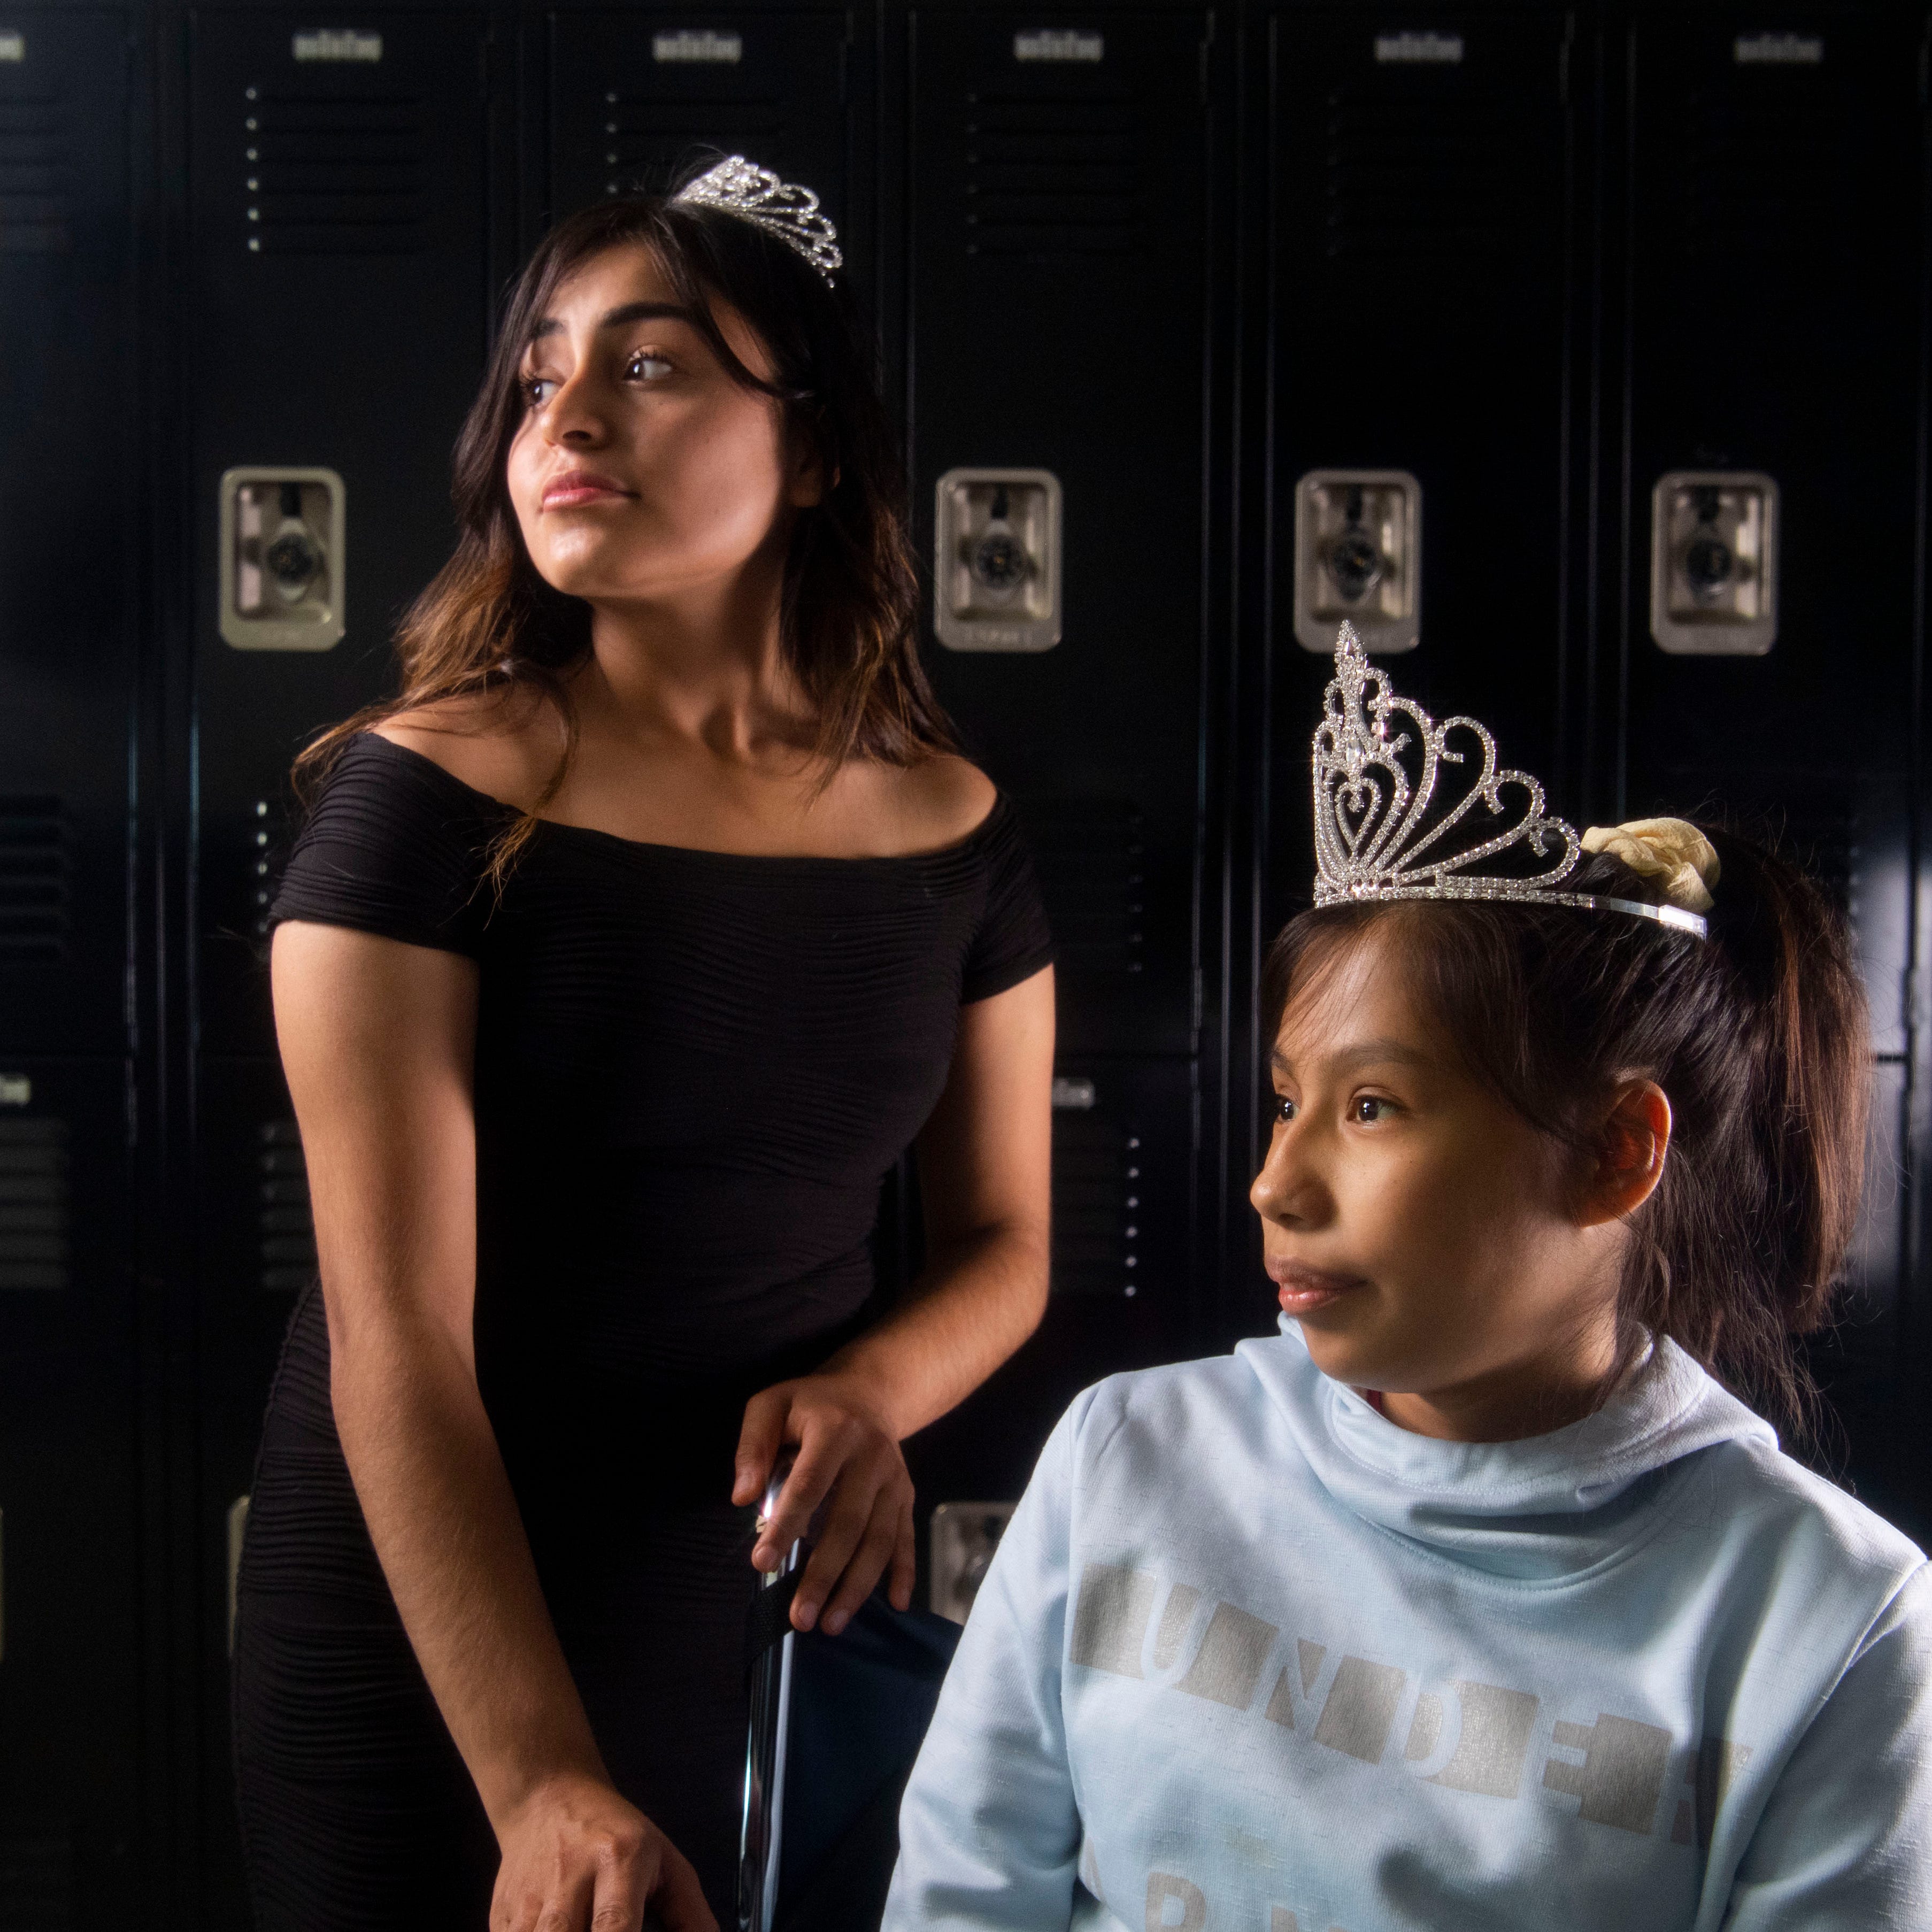 Former homecoming queen Juleydi Franco Ramos stands next to the new homecoming queen, Liliana Pahuamba Roque at Crossville High School  in Crossville, Alabama, Thursday, Nov. 3, 2022.